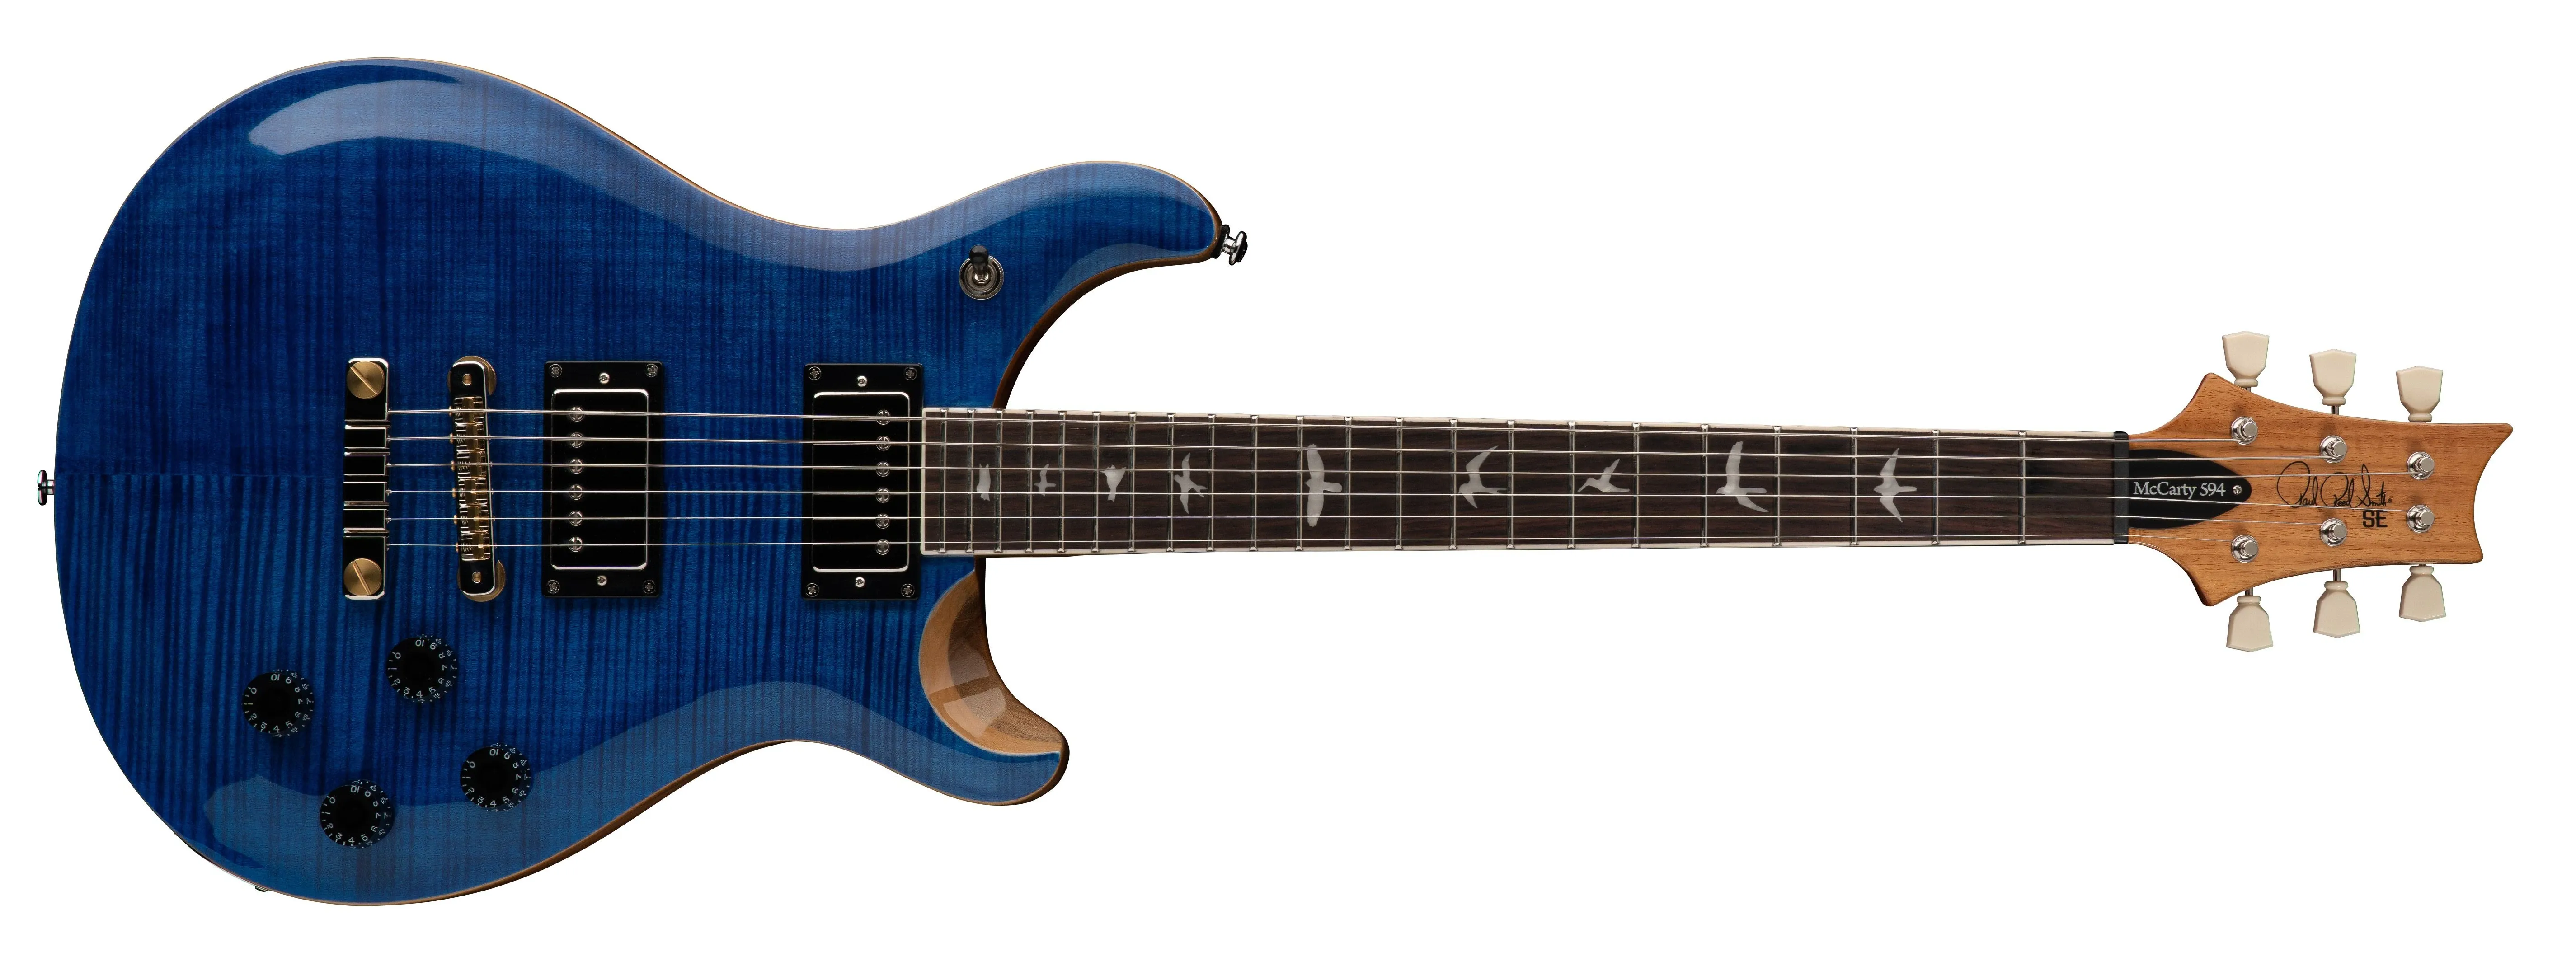 PRS SE McCarty 594 faded blue